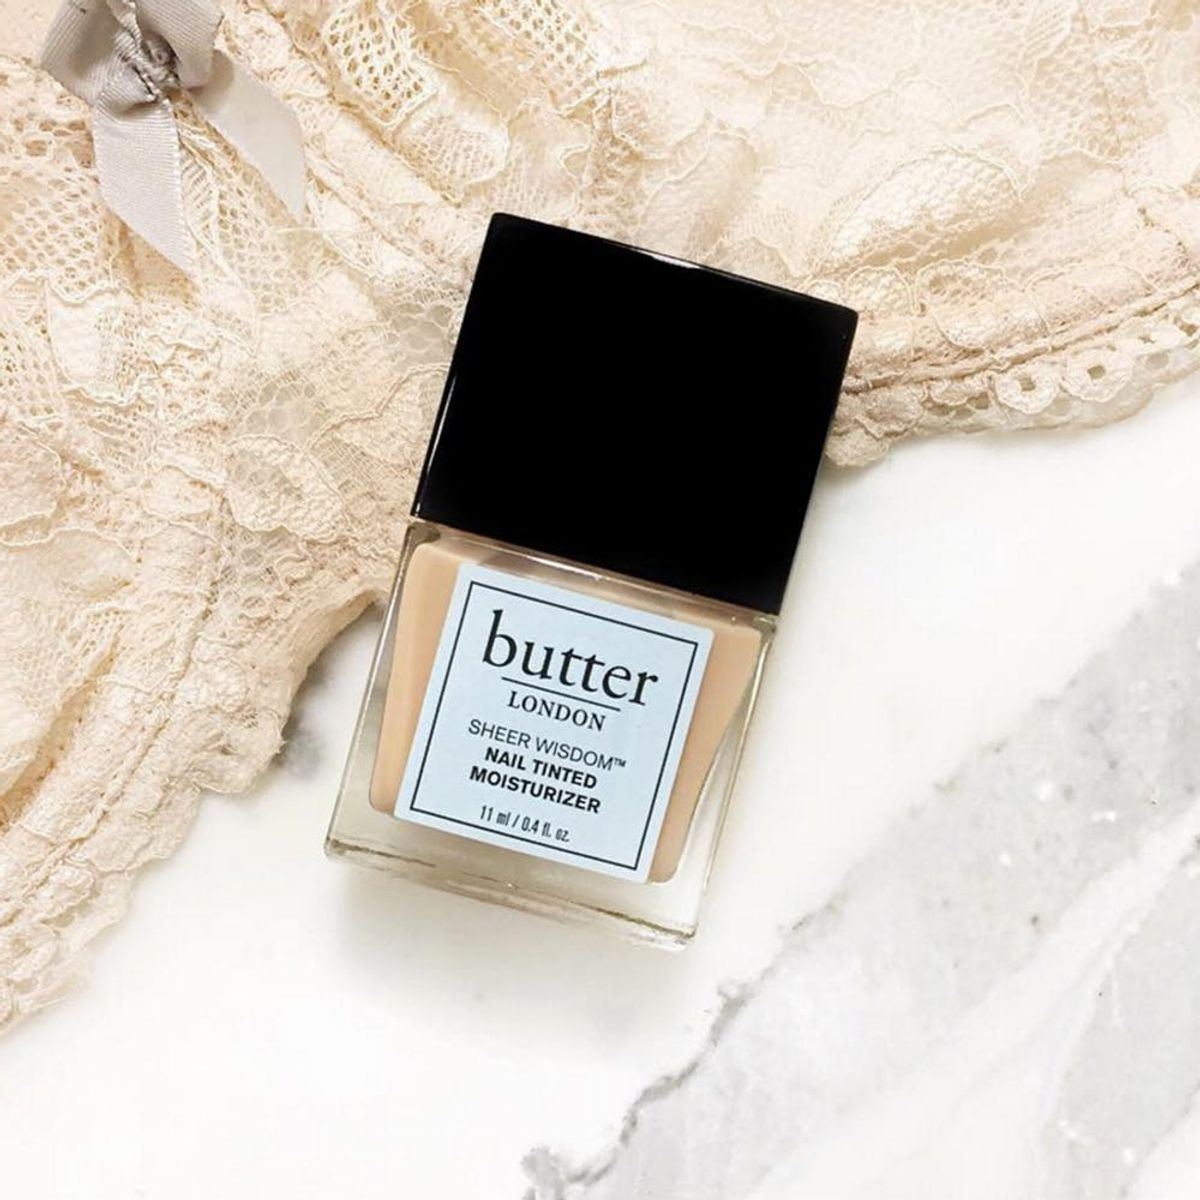 Butter London Created a Nude Polish That Flatters Every Skin Tone